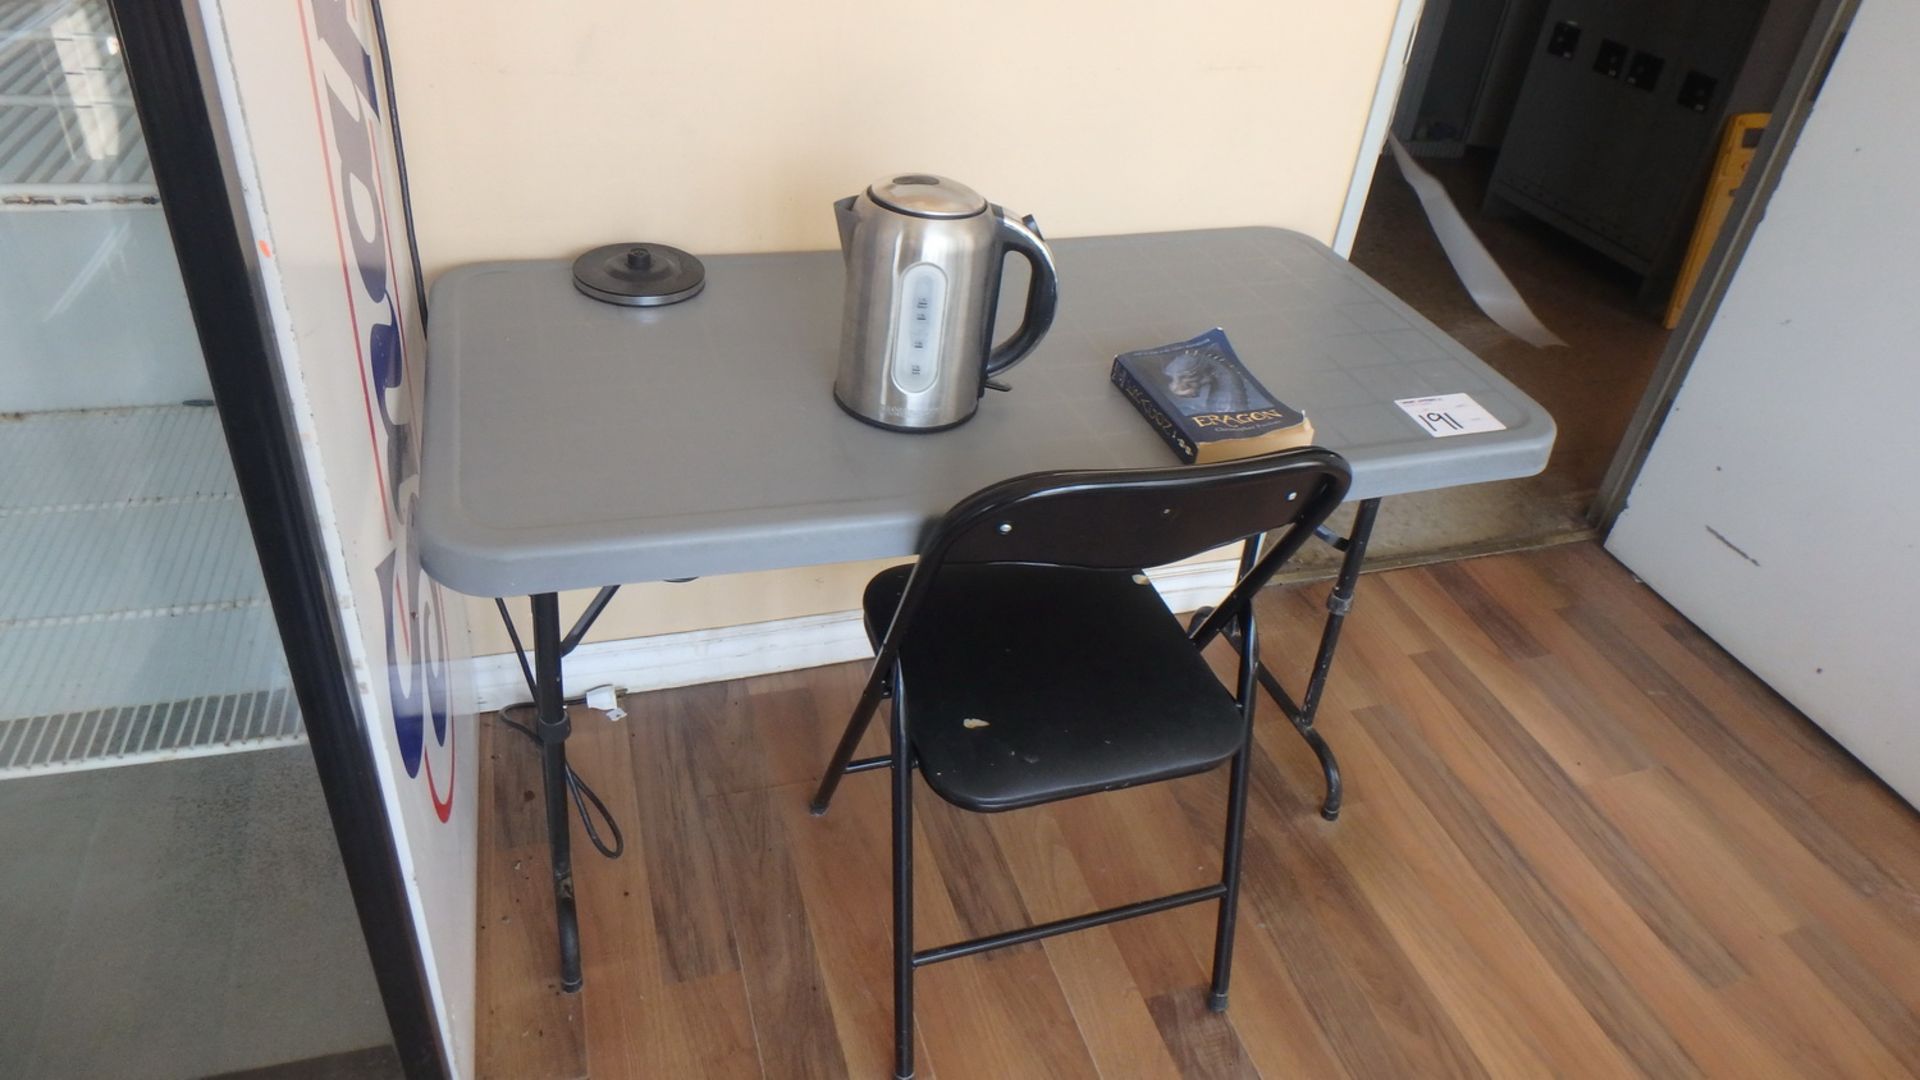 LOT - CONTENTS OF LUNCH ROOM C/O: GLASS DOOR FRIDGE, FOLDING TABLES, CHAIRS, DESK, MICROWAVE, ETC. - Image 4 of 4